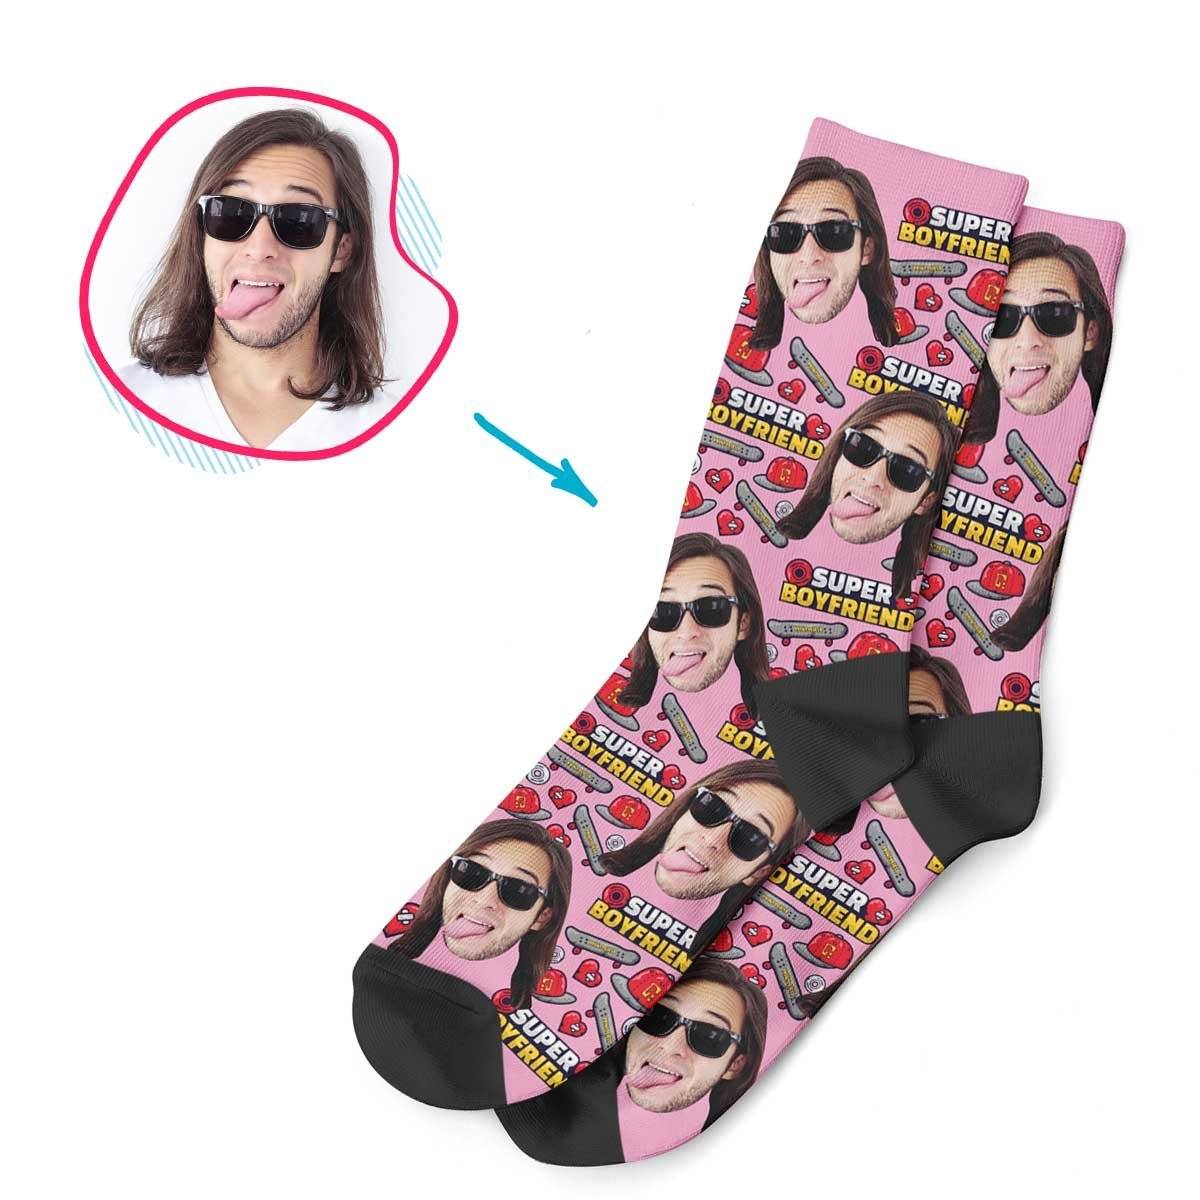 Pink Boyfriend personalized socks with photo of face printed on them